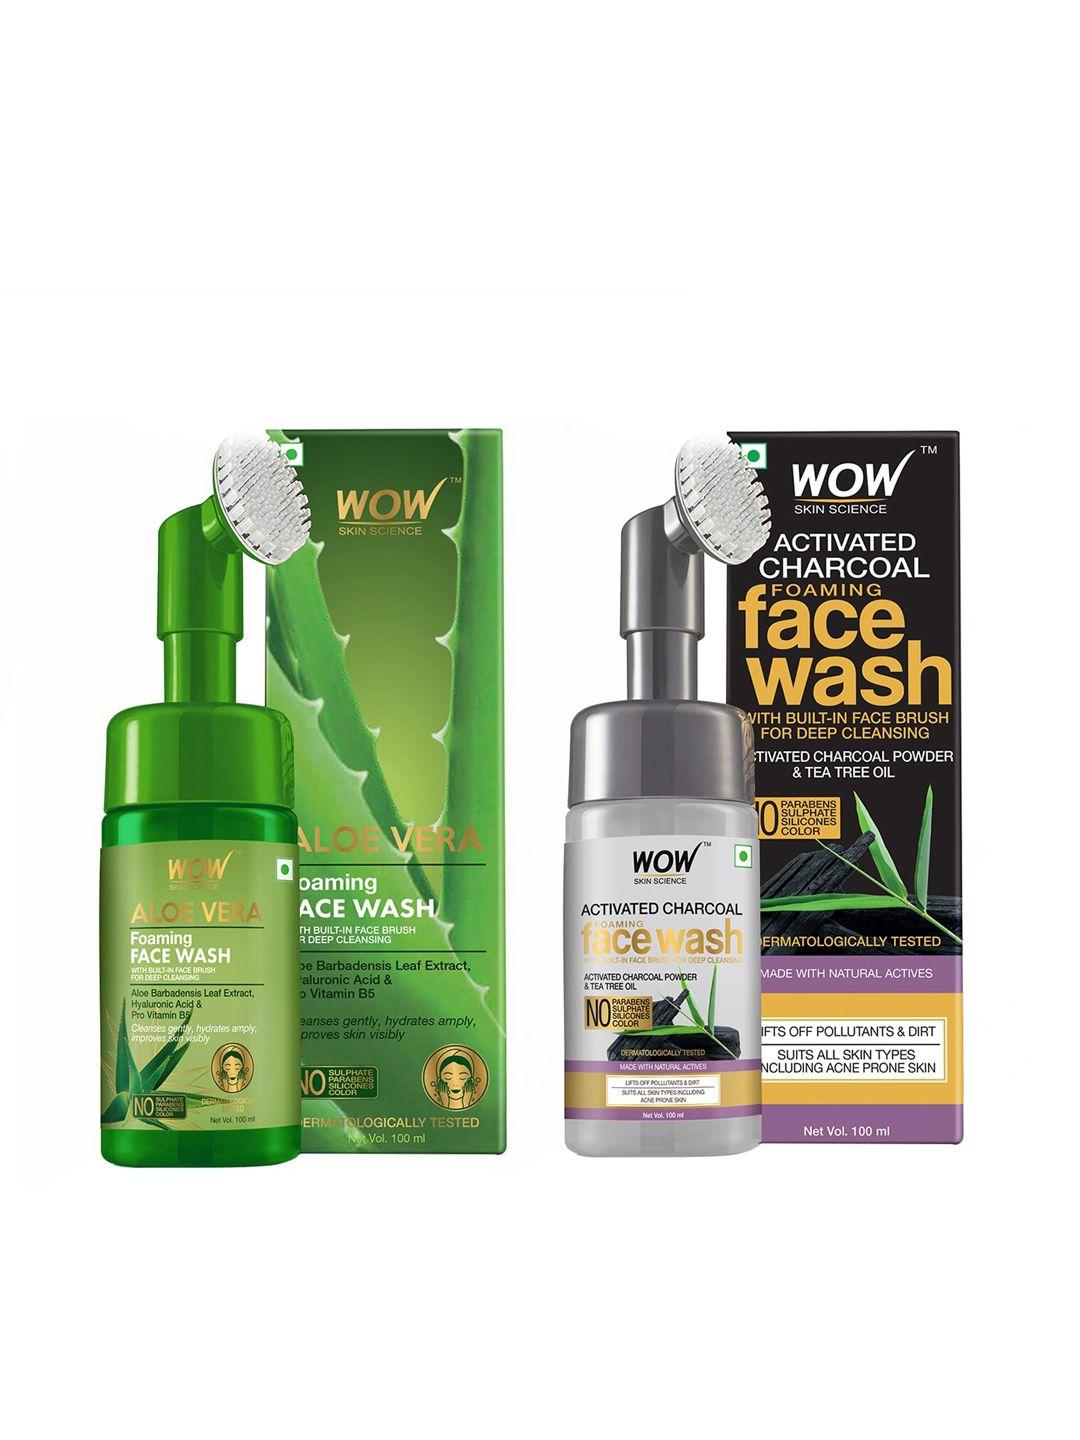 wow skin science unisex set of aloe vera & activated charcoal face washes - 200 ml